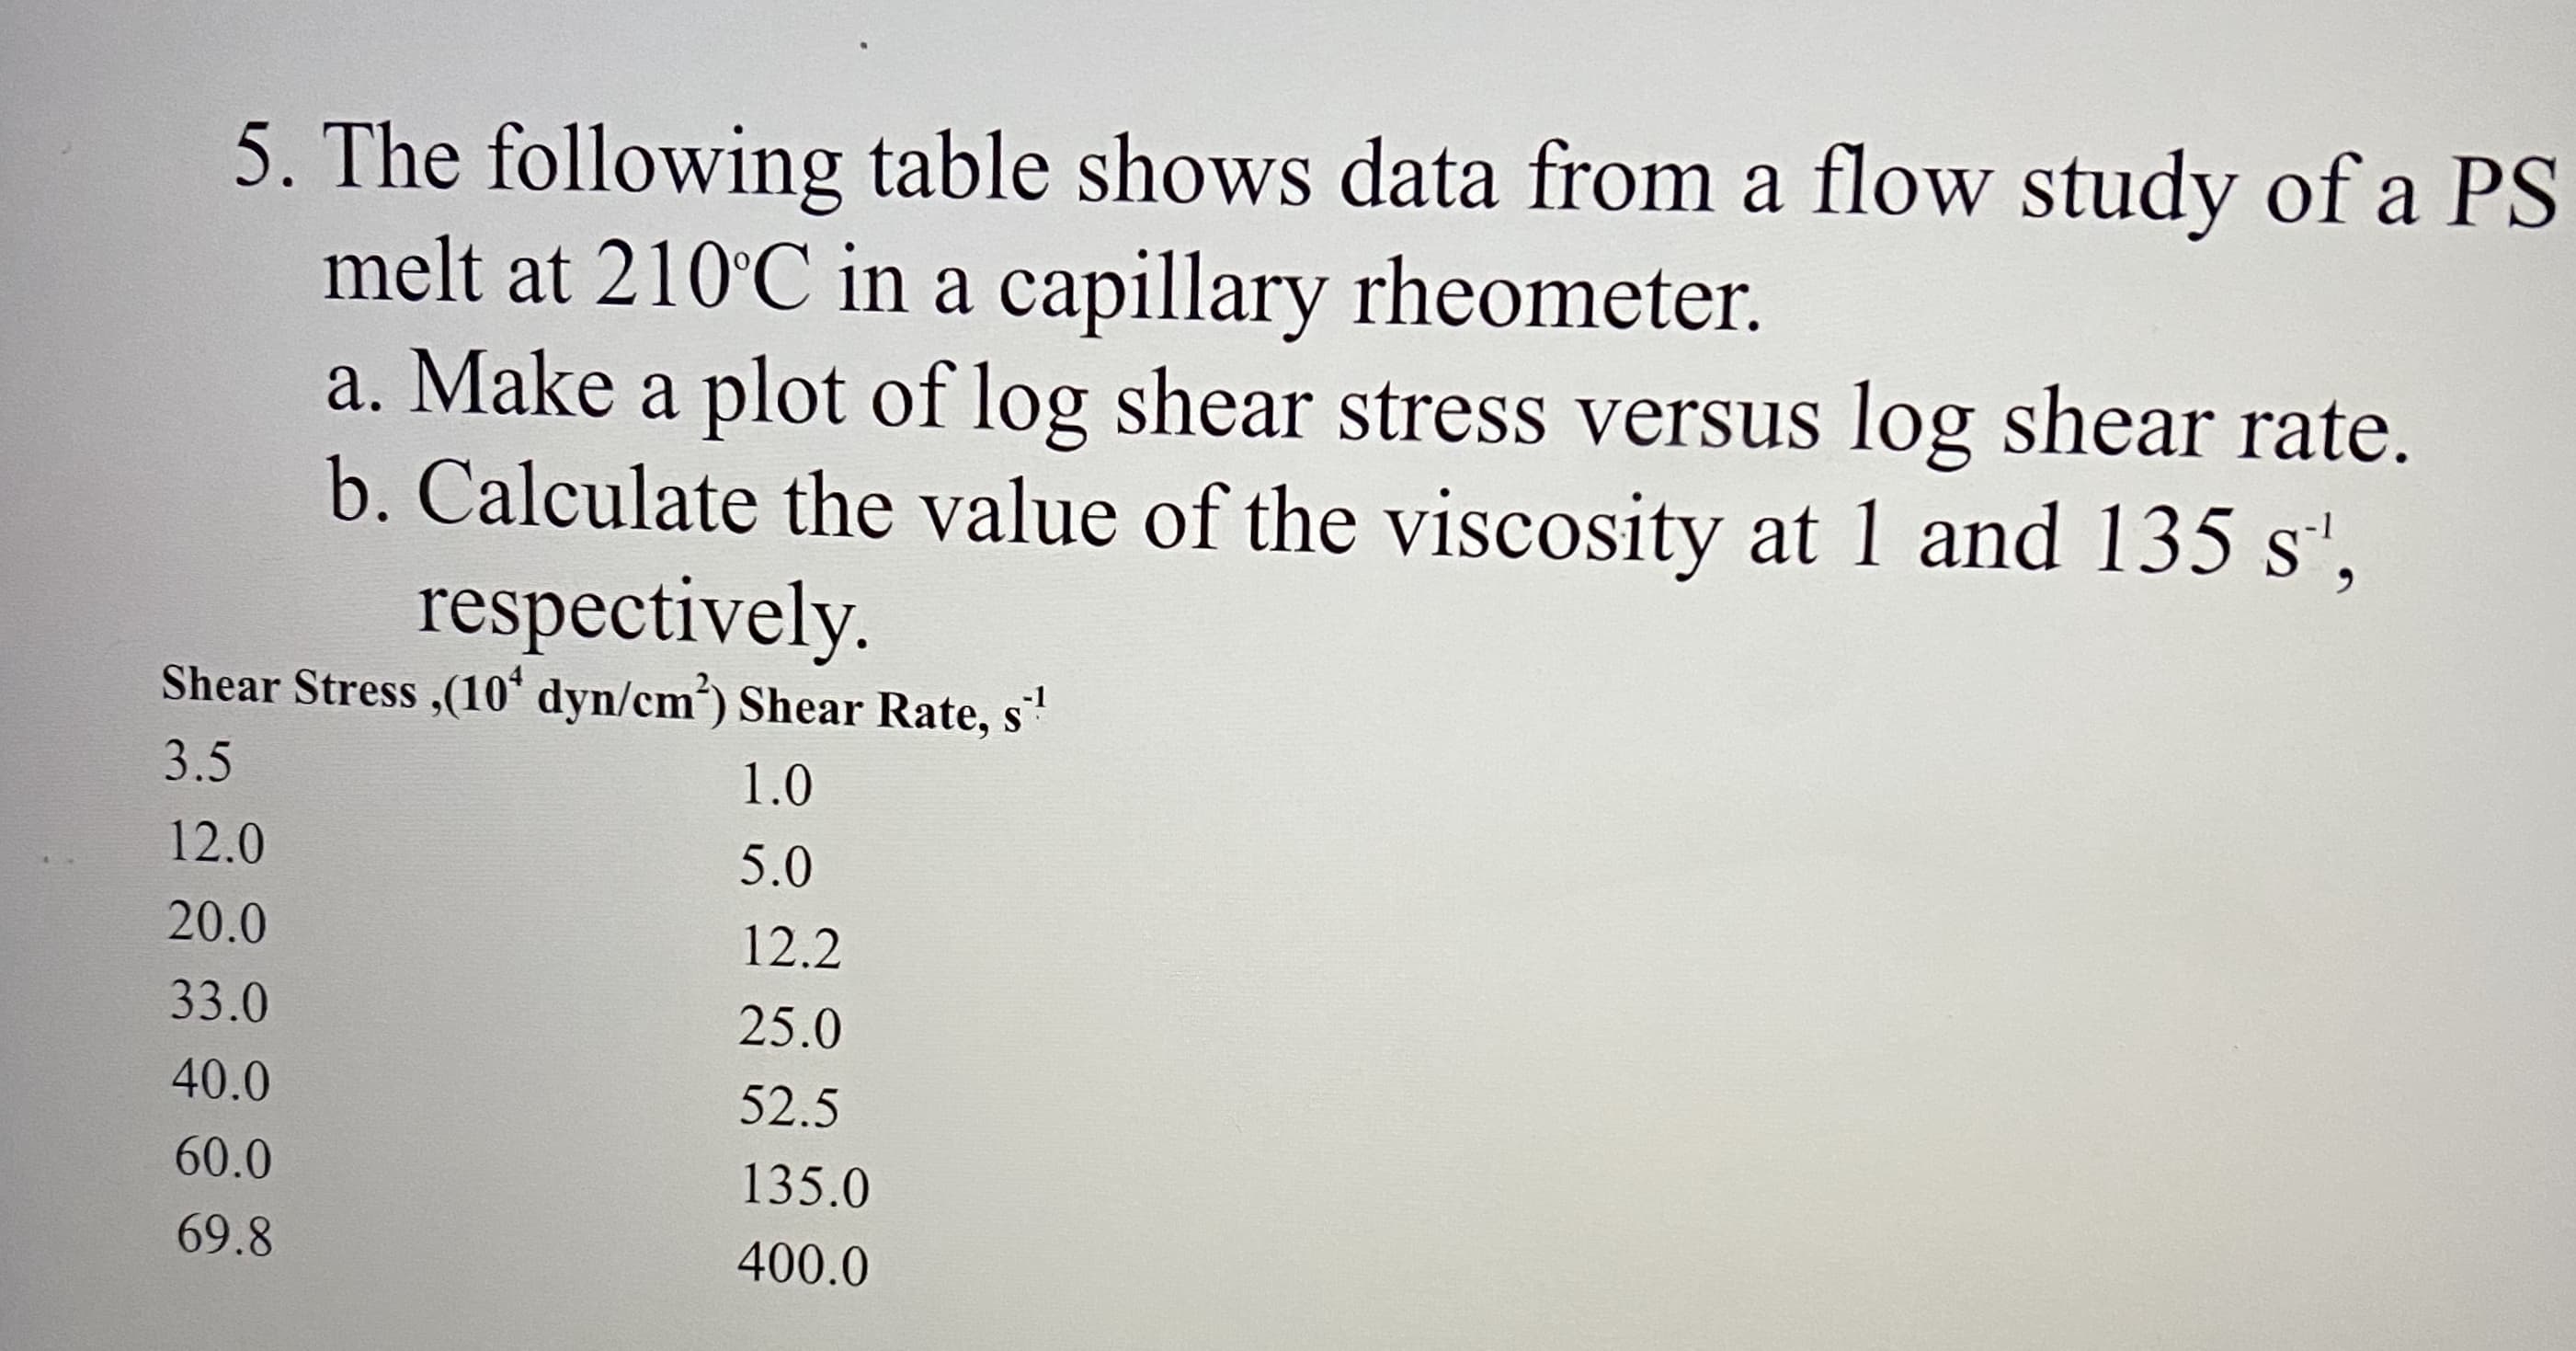 5. The following table shows data from a flow study of a PS
melt at 210°C in a capillary rheometer.
a. Make a plot of log shear stress versus log shear rate.
b. Calculate the value of the viscosity at 1 and 135 s',
respectively.
Shear Stress ,(10° dyn/cm') Shear Rate,
3.5
1.0
12.0
5.0
20.0
12.2
33.0
25.0
40.0
52.5
60.0
135.0
69.8
400.0
